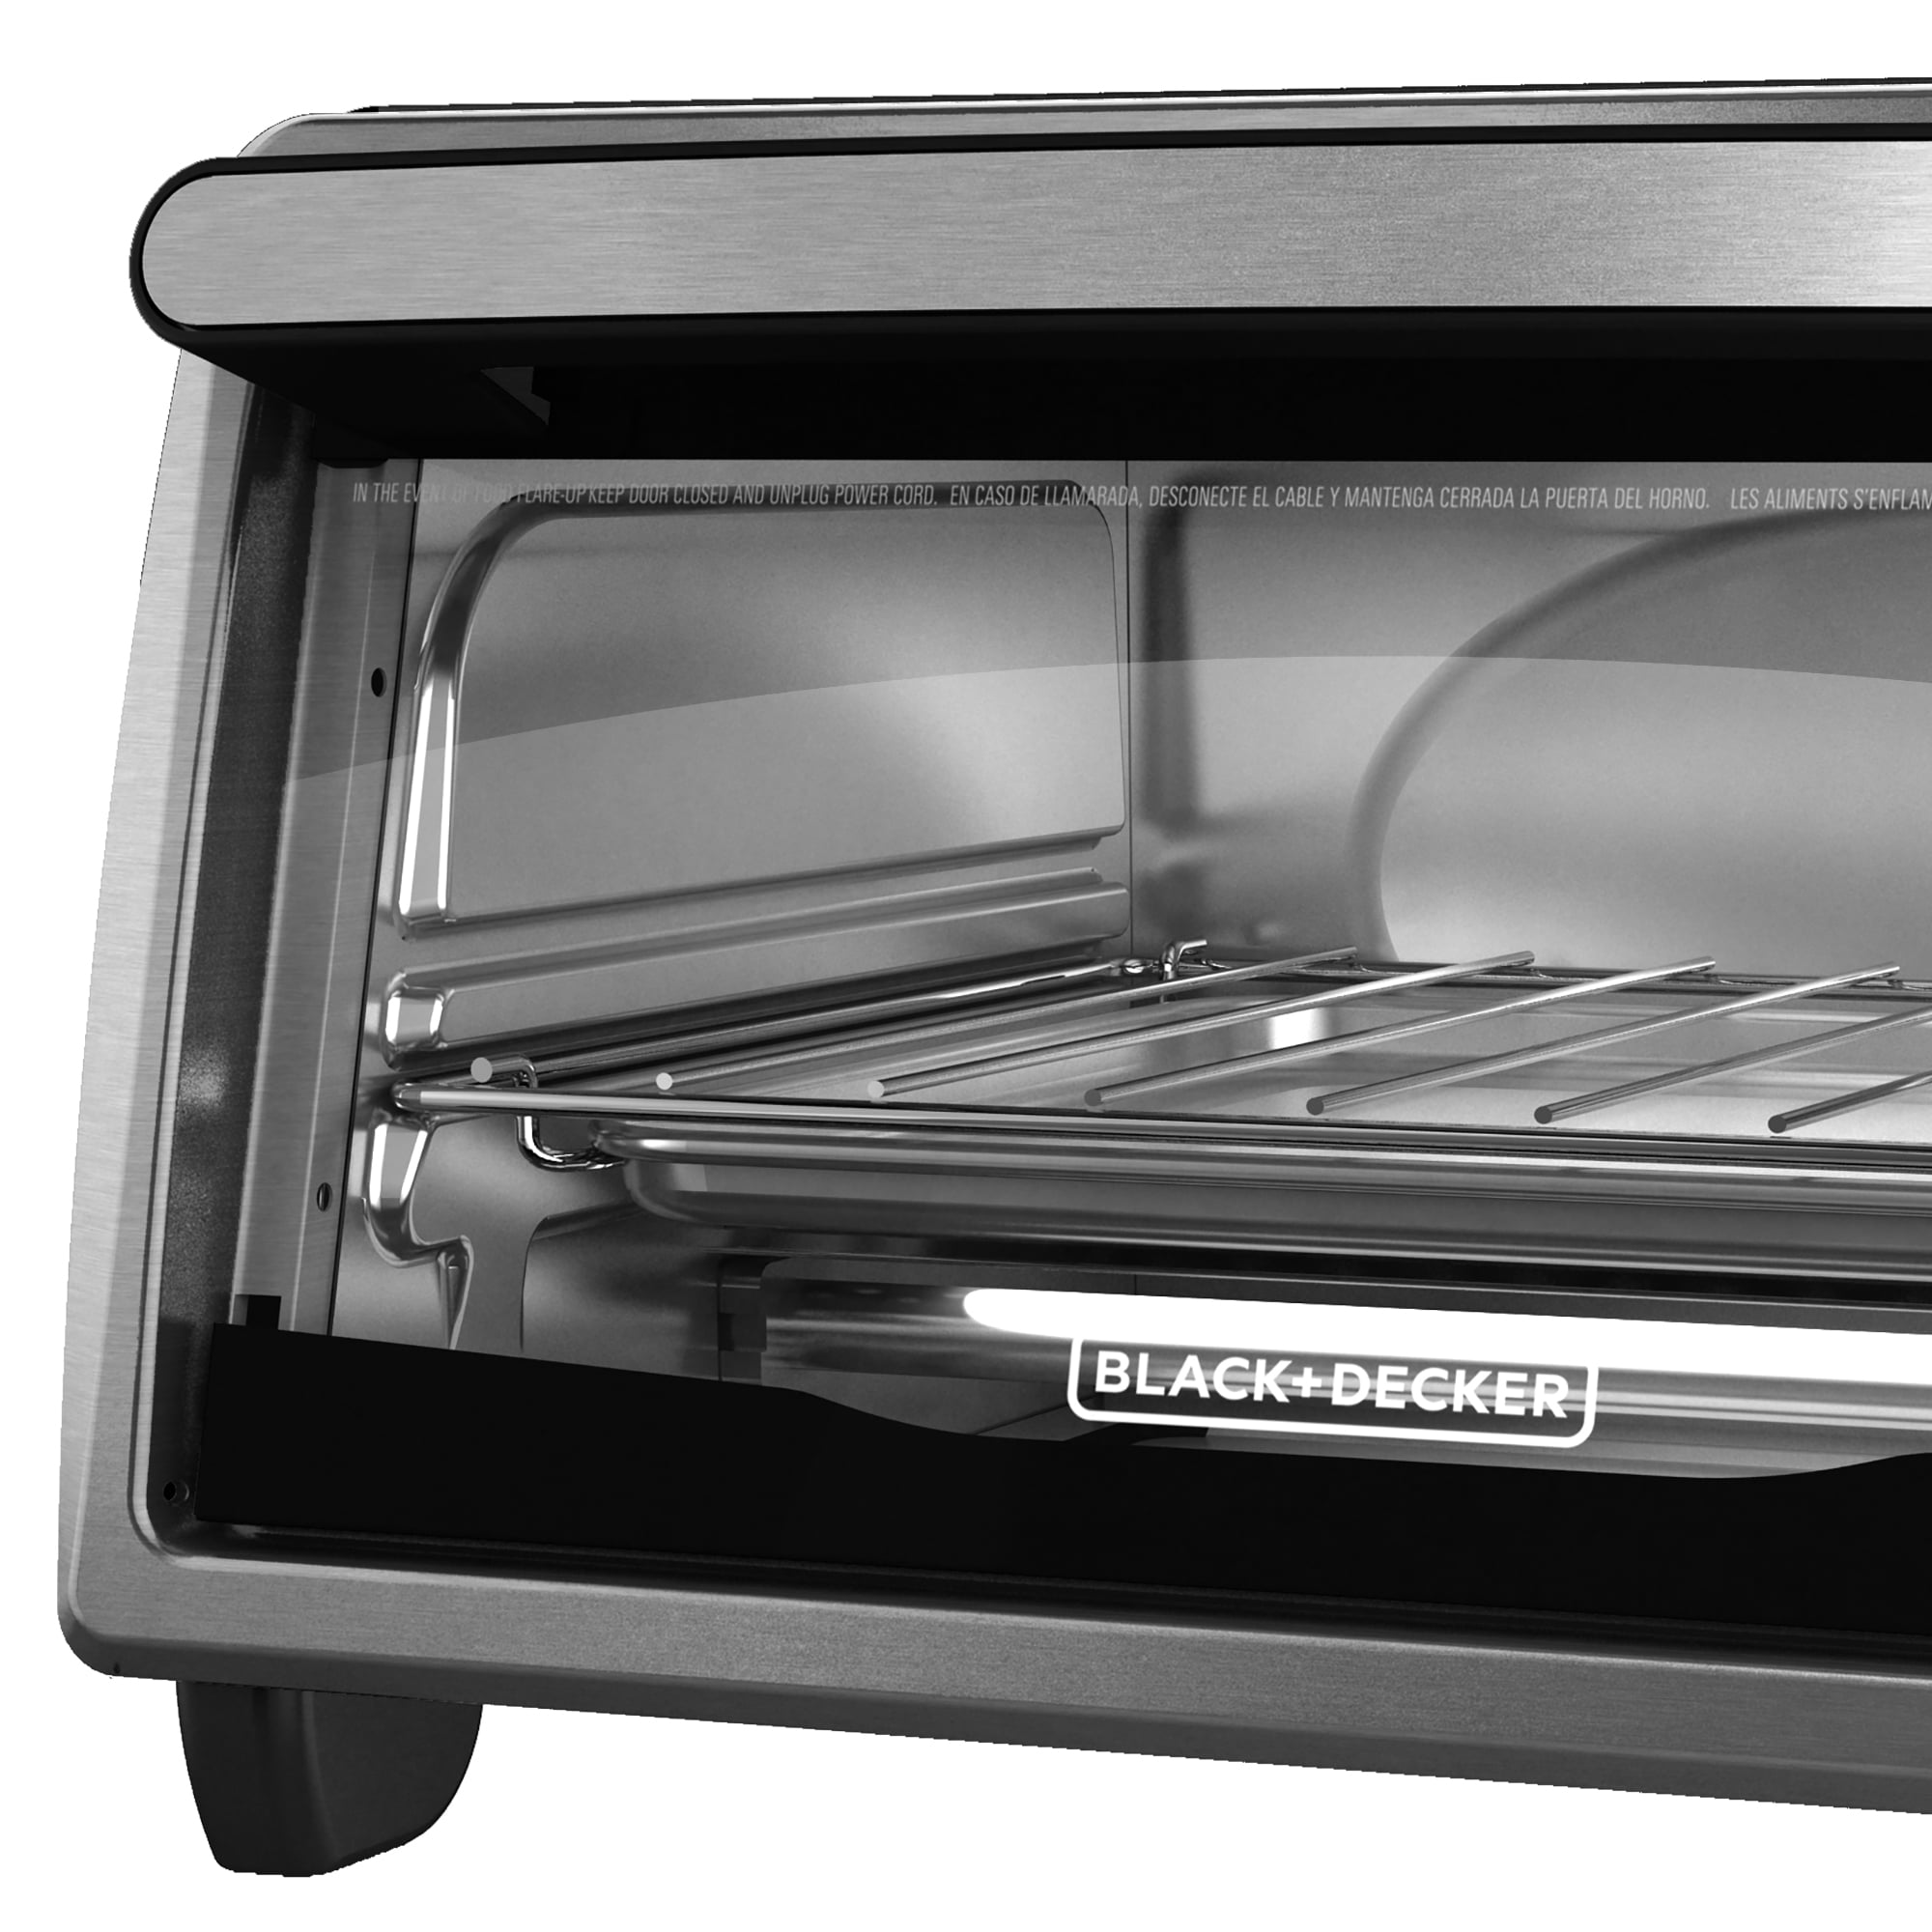 BLACK+DECKER 4-Slice Stainless Steel Toaster Oven TO1313SBD - The Home Depot